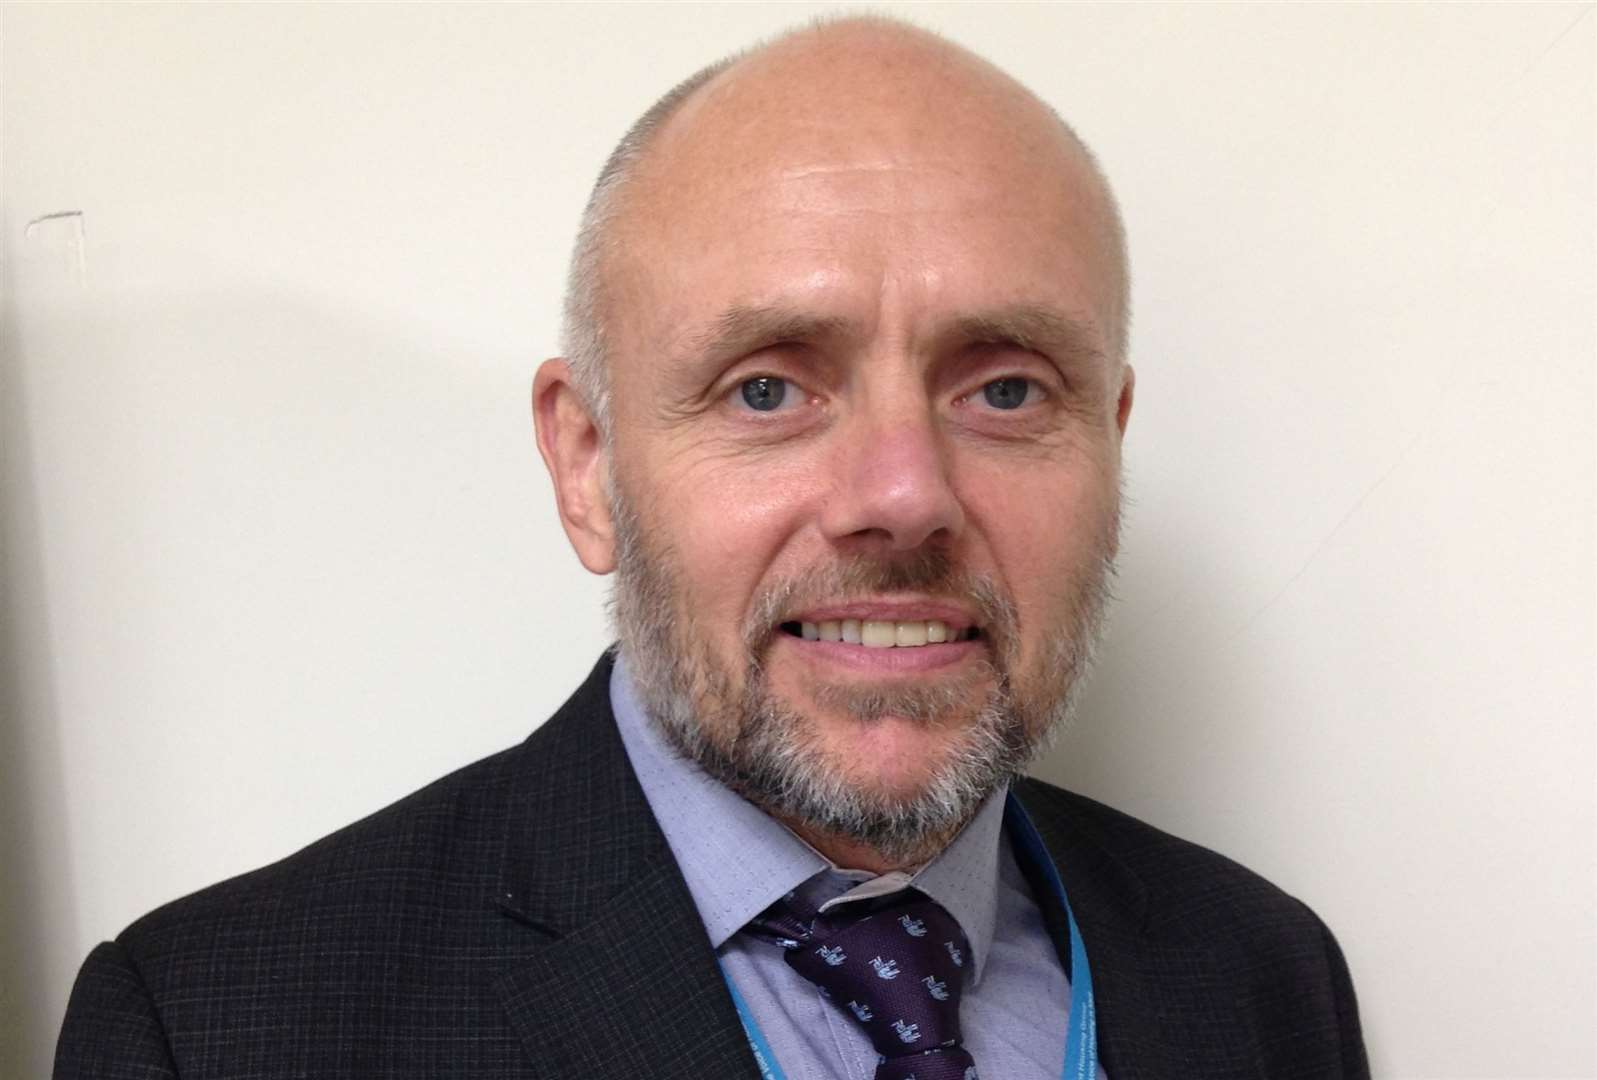 Bob Porter is Thanet District Council's director of housing and planning